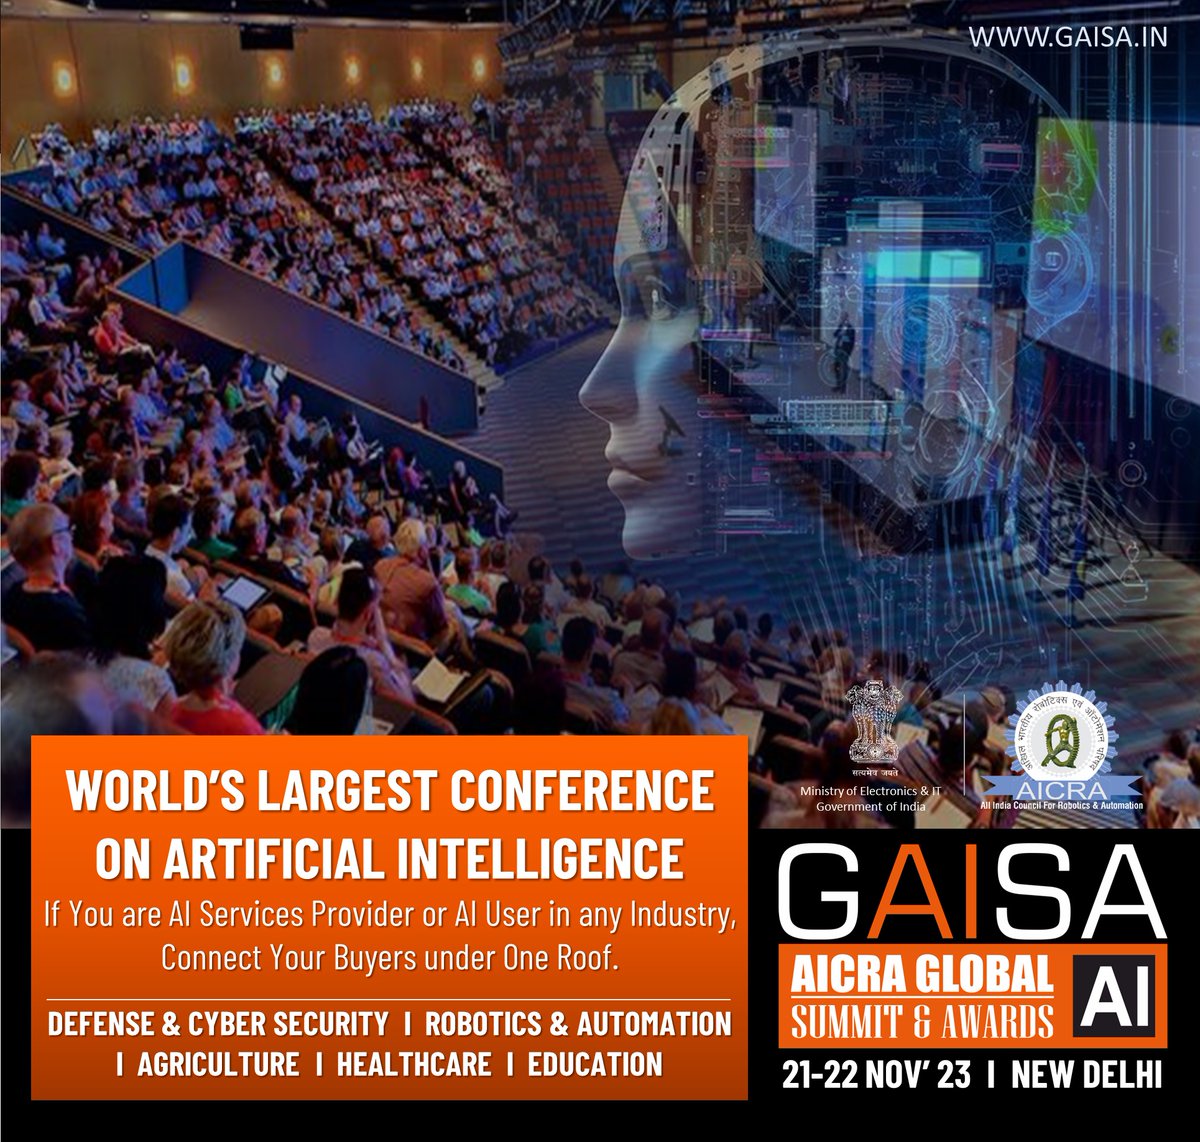 4th edition of Global Artificial Intelligence Summit & Awards'2023, the largest ever gathering of AI lovers! Secure your delegate pass! 🚀✨ Don't miss out on this opportunity to connect with industry leaders. Visit: gaisa.in #aicra #GAISA #artificialintelligence